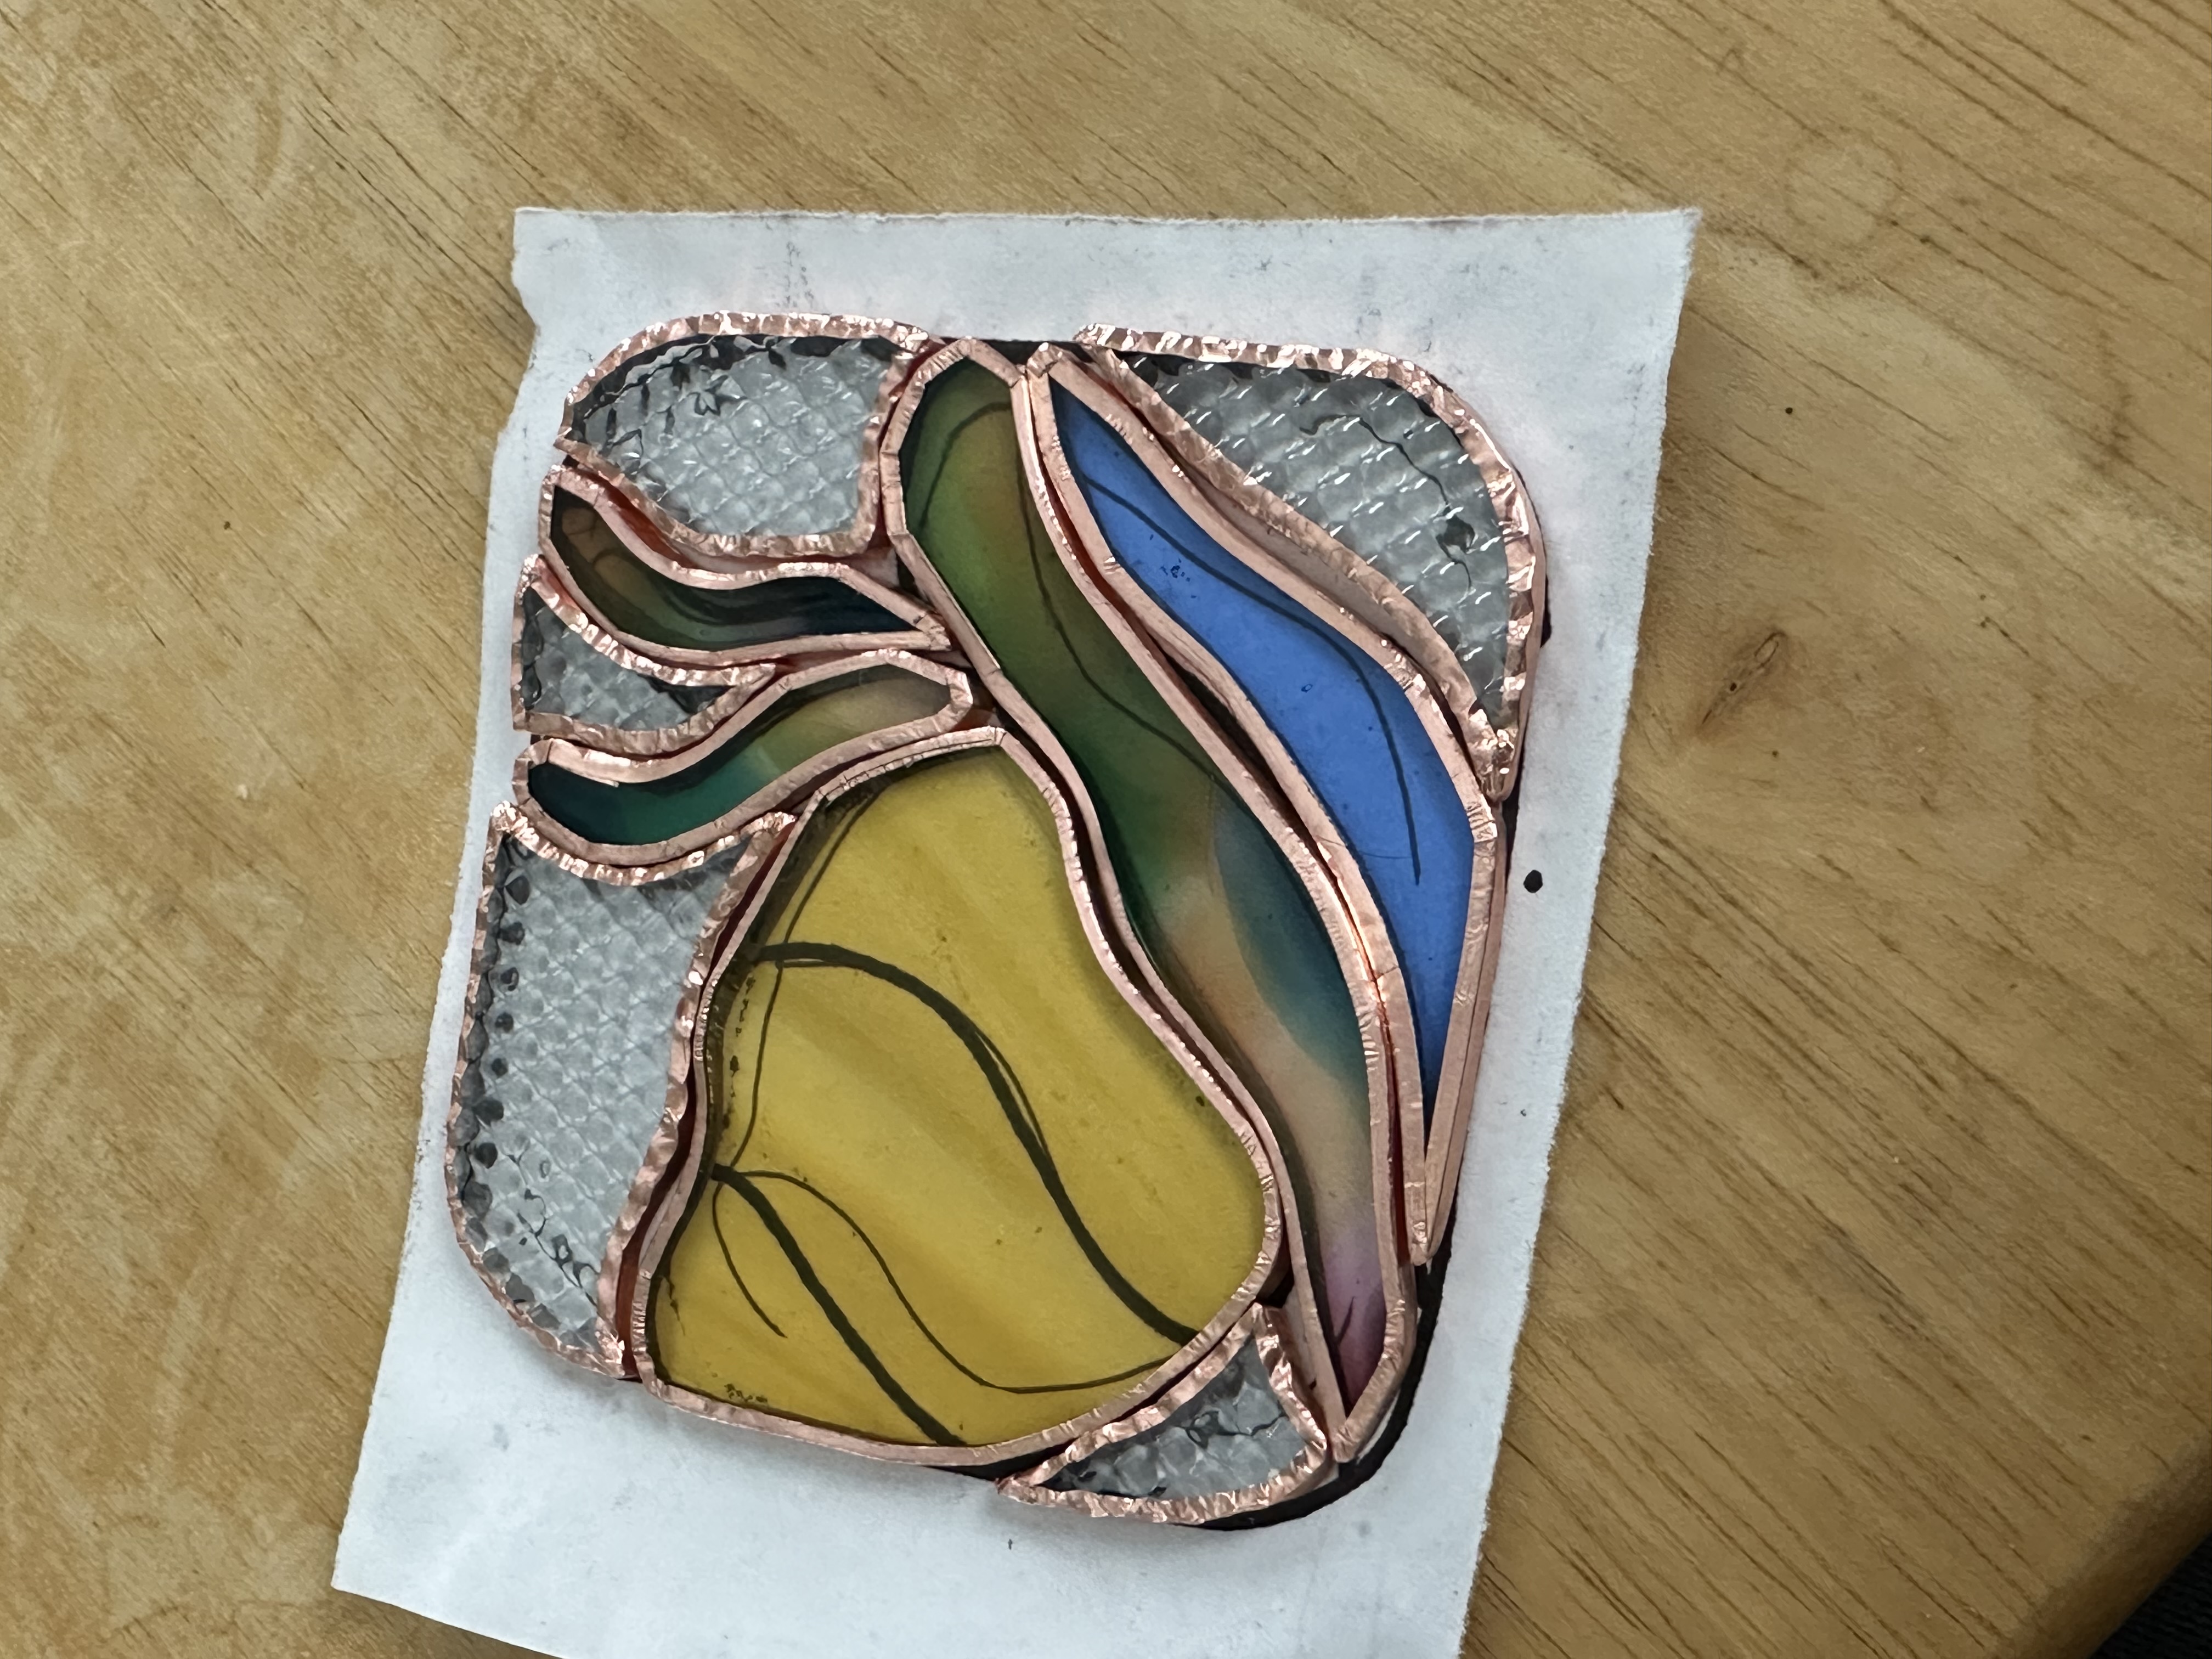 My pattern of glass pieces that have been ground are now wrapped in copper foil along the edges